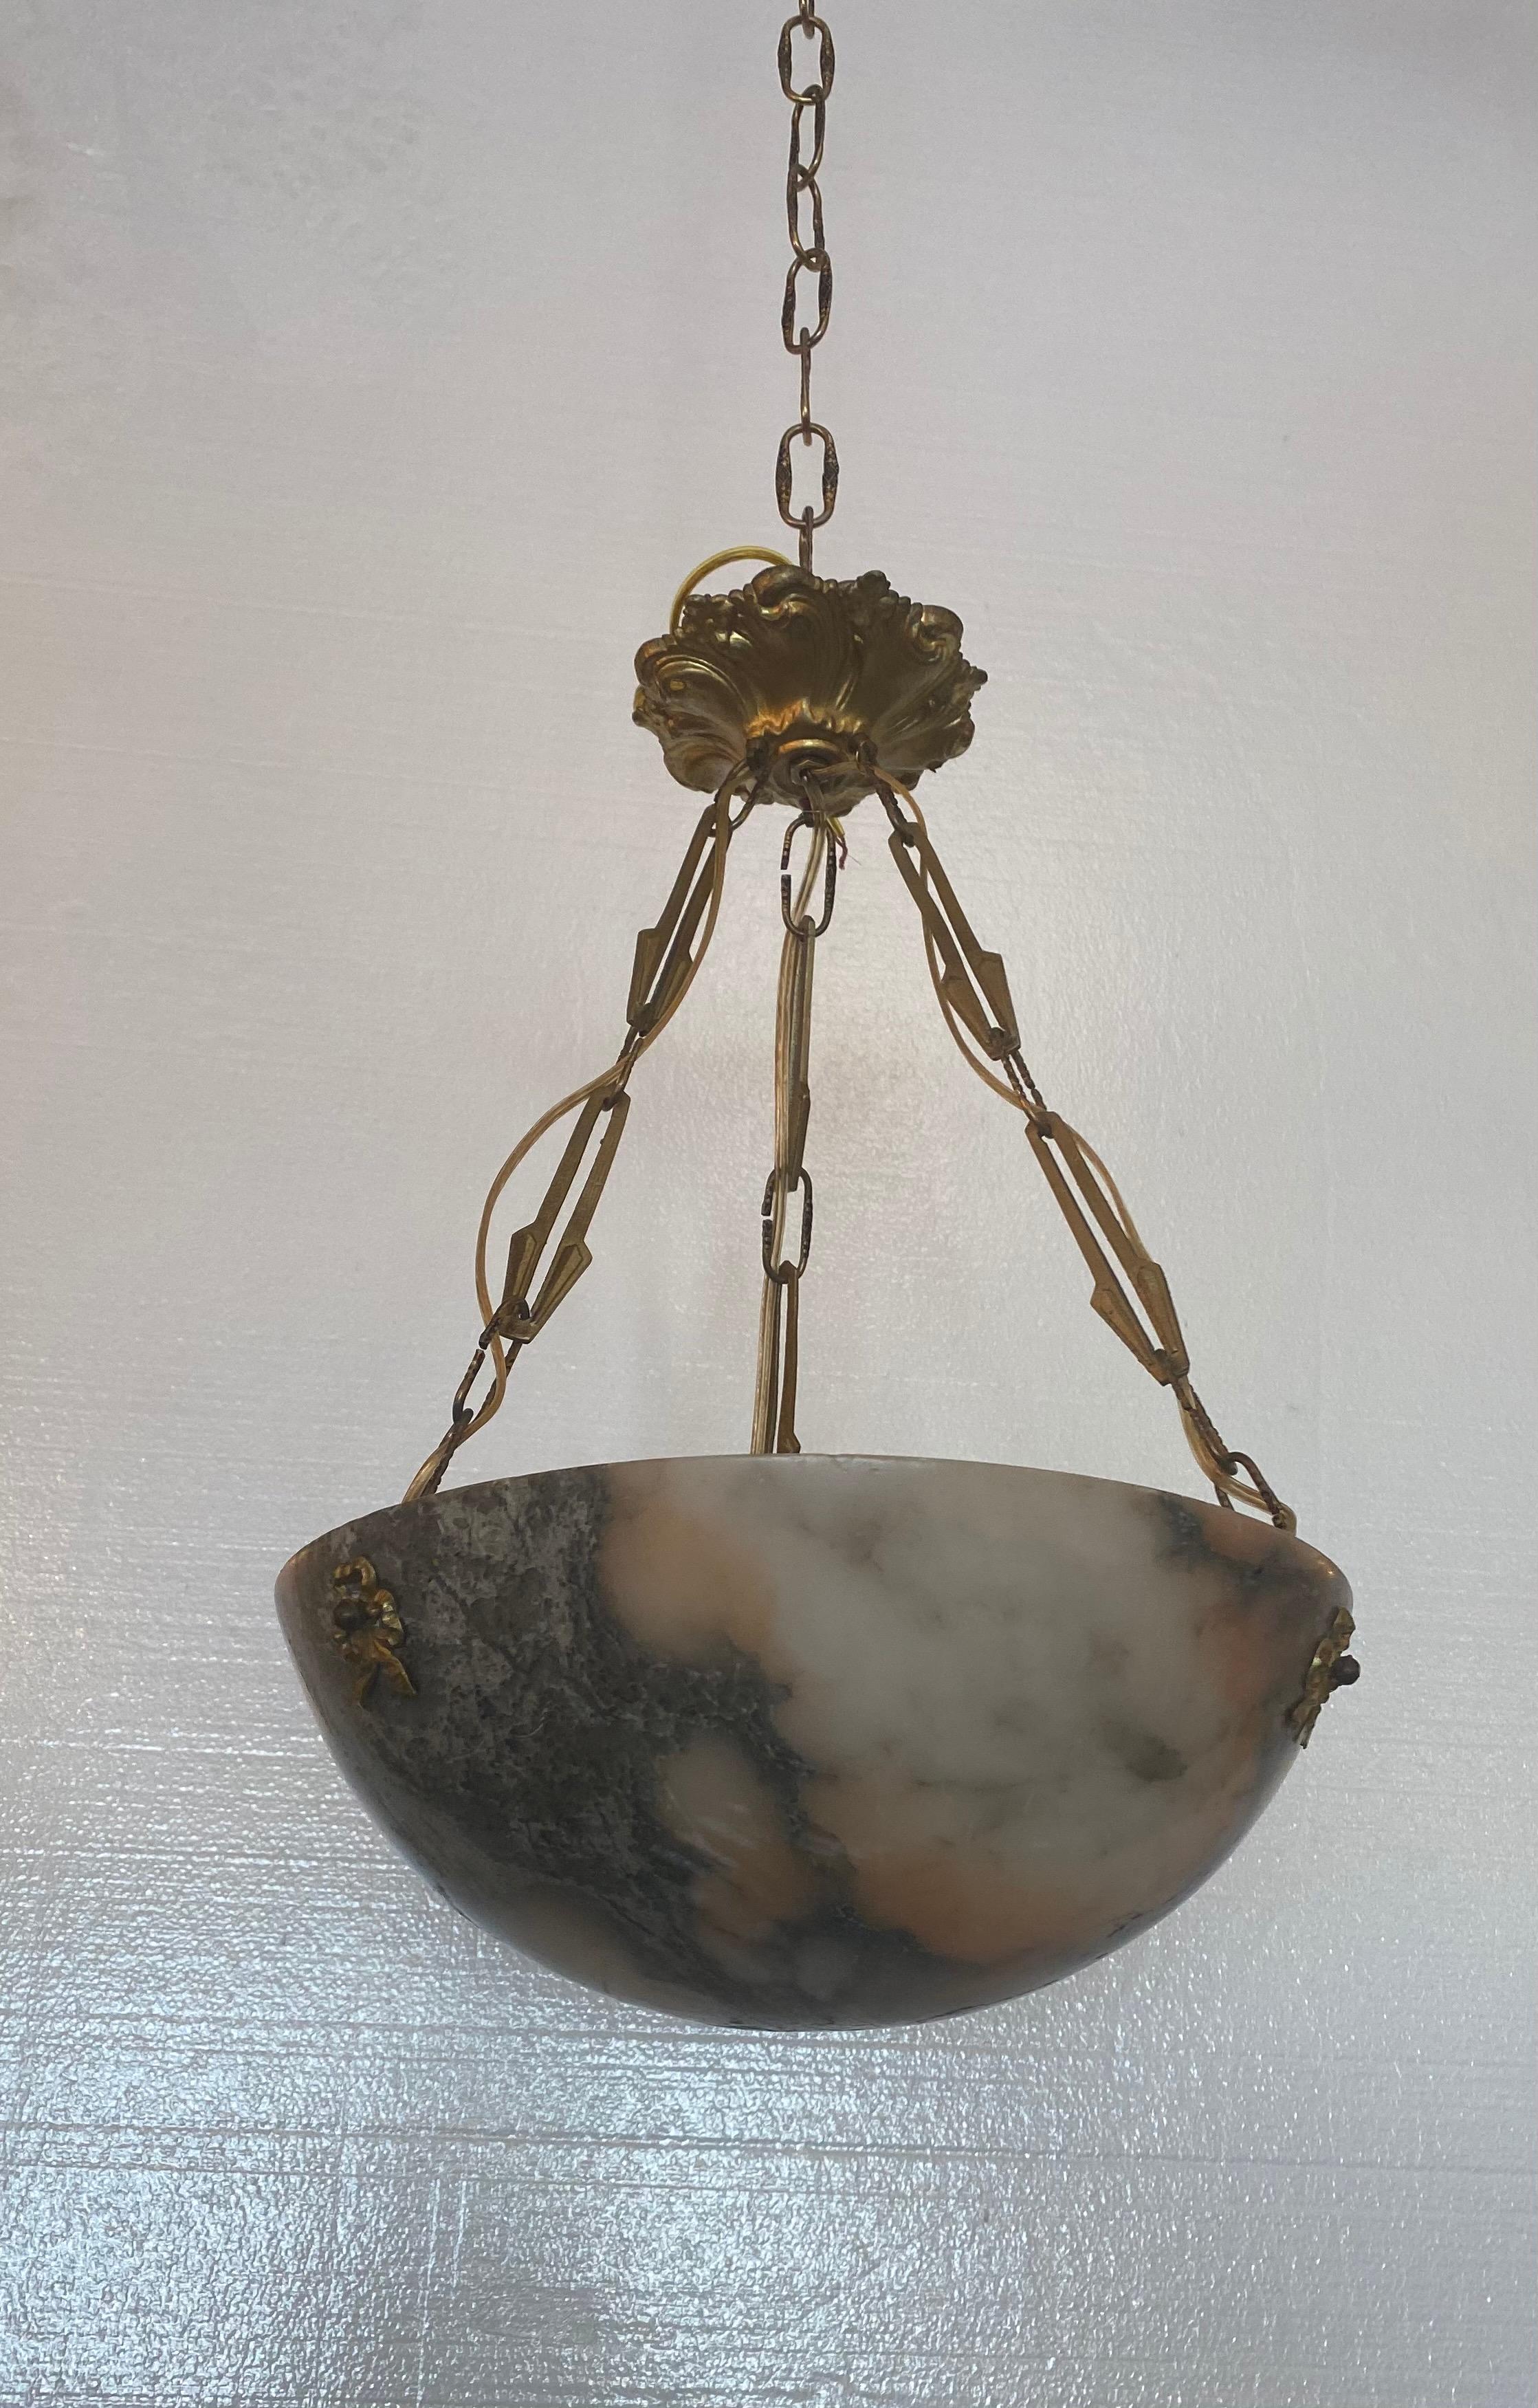 Quality white and pink marble and doré bronze chandelier. Good overall estate fresh condition with minor wear.